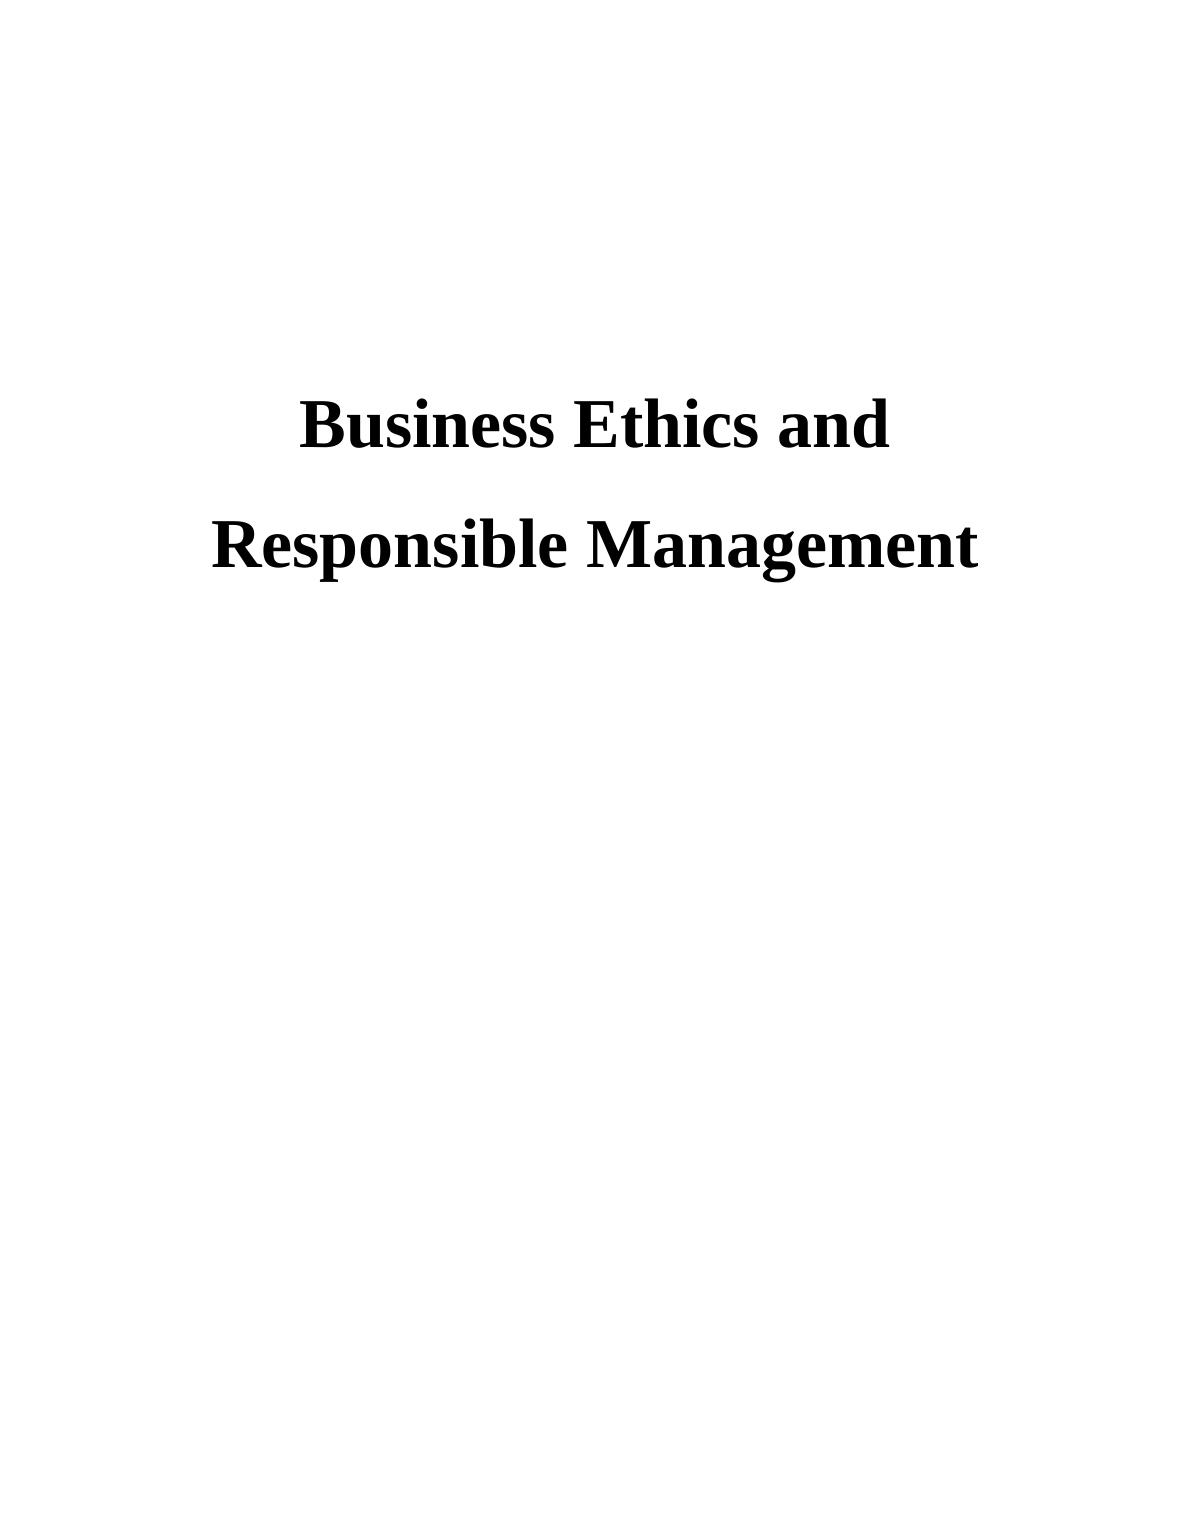 Business Ethics and Responsible Management : ASOS company_1